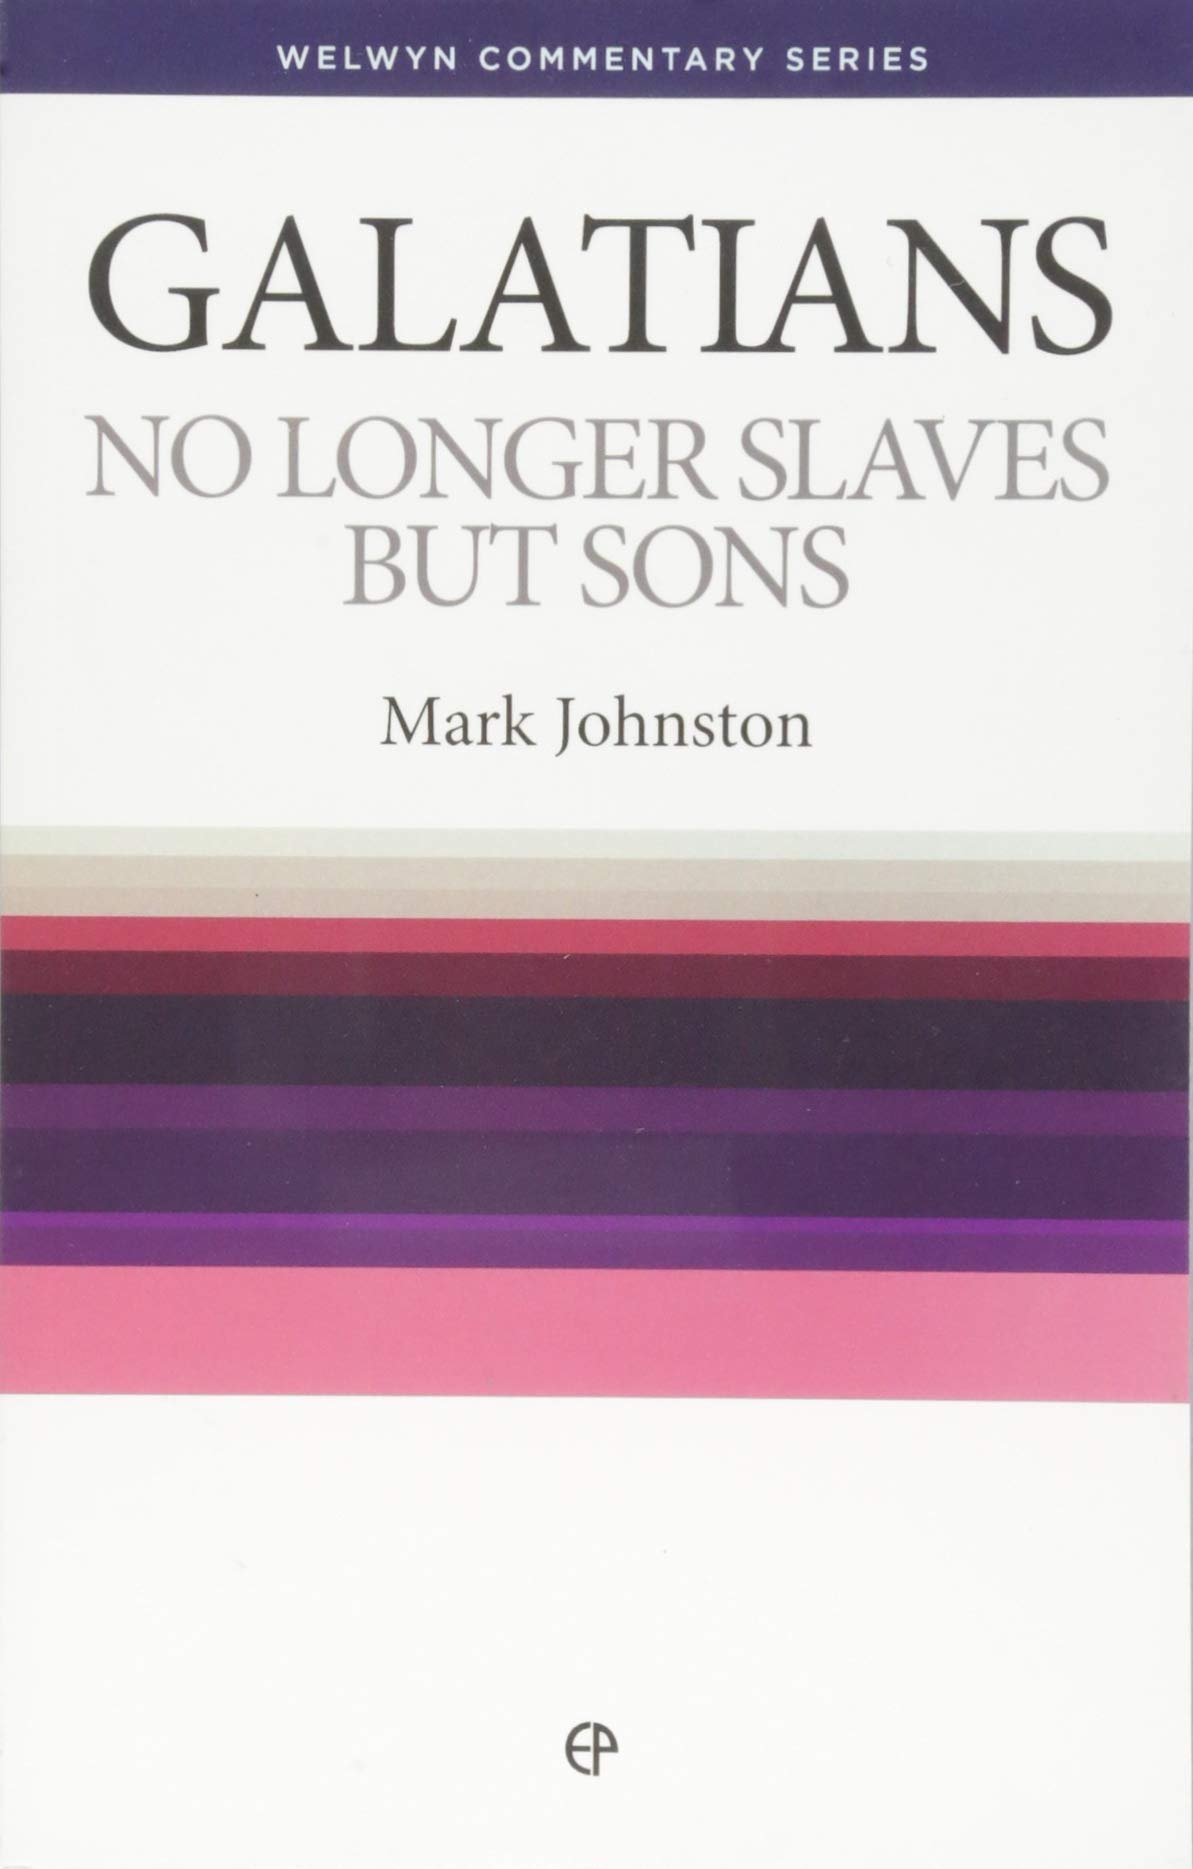 Book Notice: GALATIANS: NO LONGER SLAVES BUT SONS, by Mark Johnston